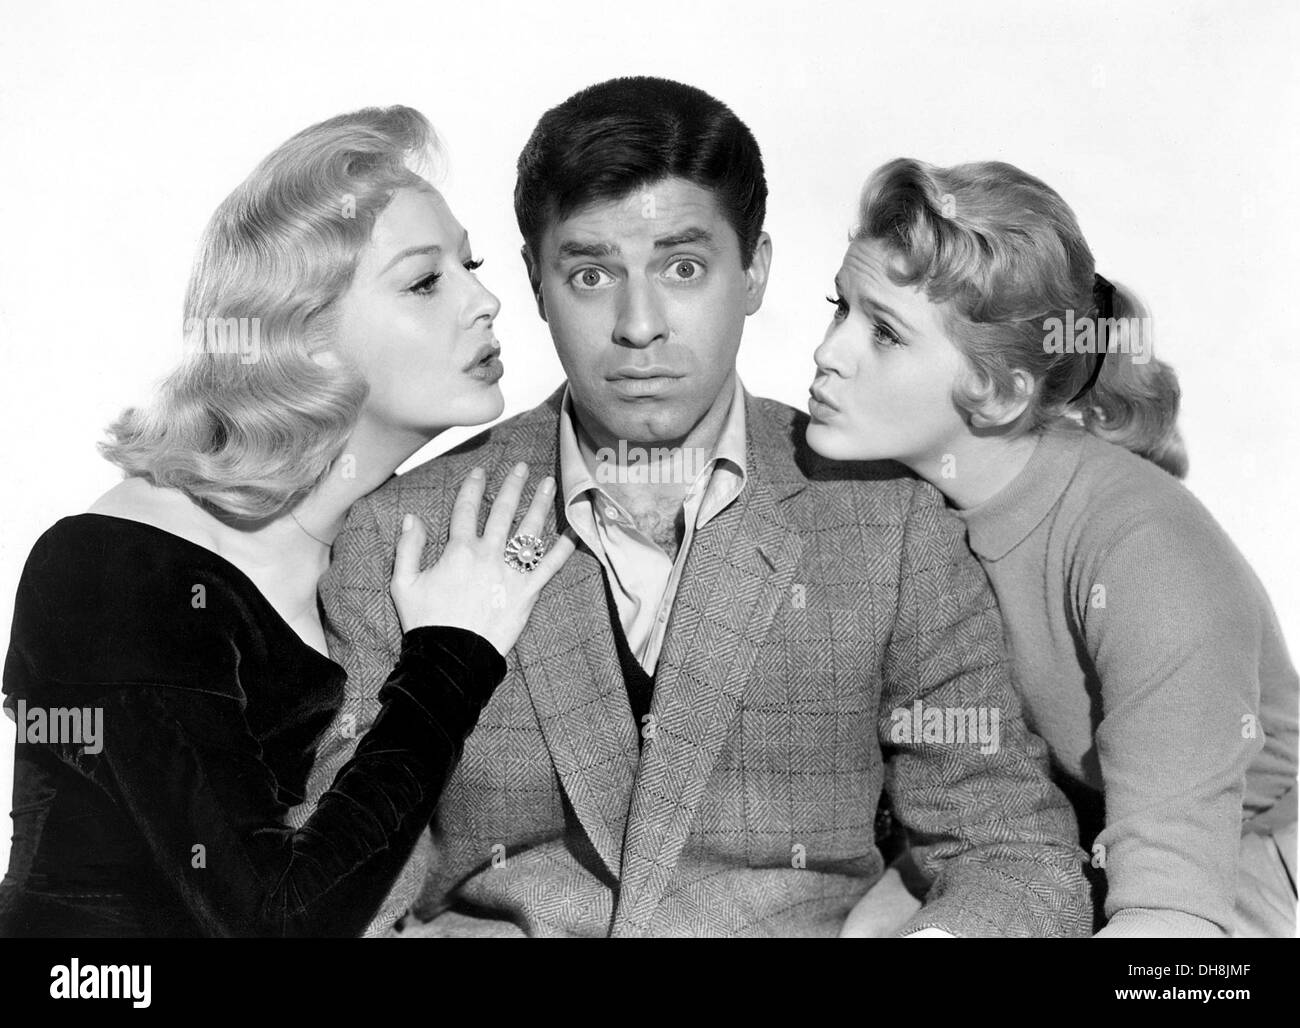 ROCK-A-BYE-BABY 1958 Paramount Pictures film con da sinistra: Marilyn Maxwell, Jerry Lewis, Connie Stevens Foto Stock